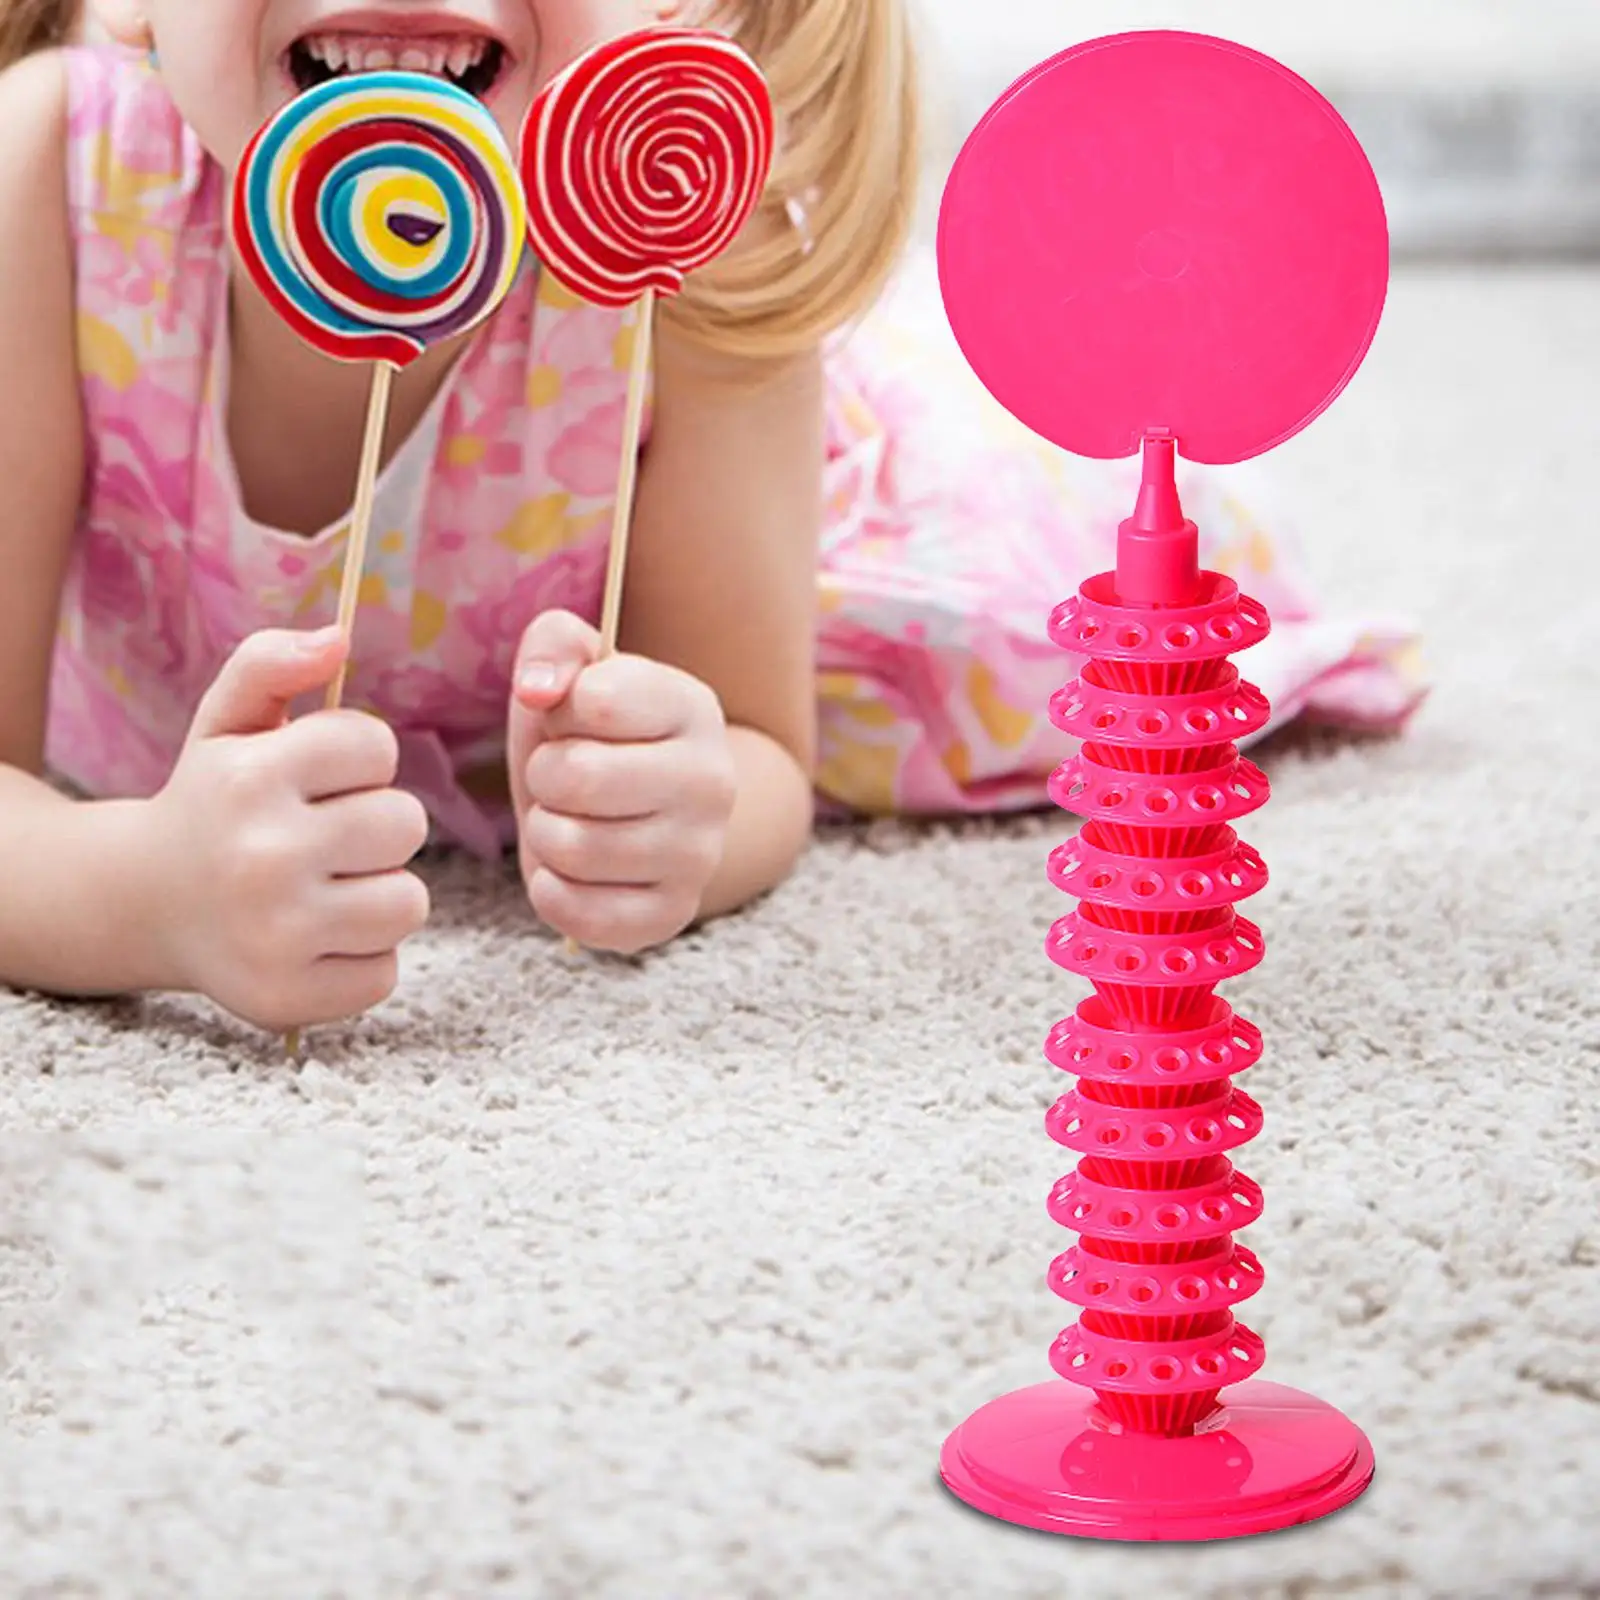 Multi Layer Lollipop Holder Durable Pluggable Decorative Candy Table Display for Party Wedding